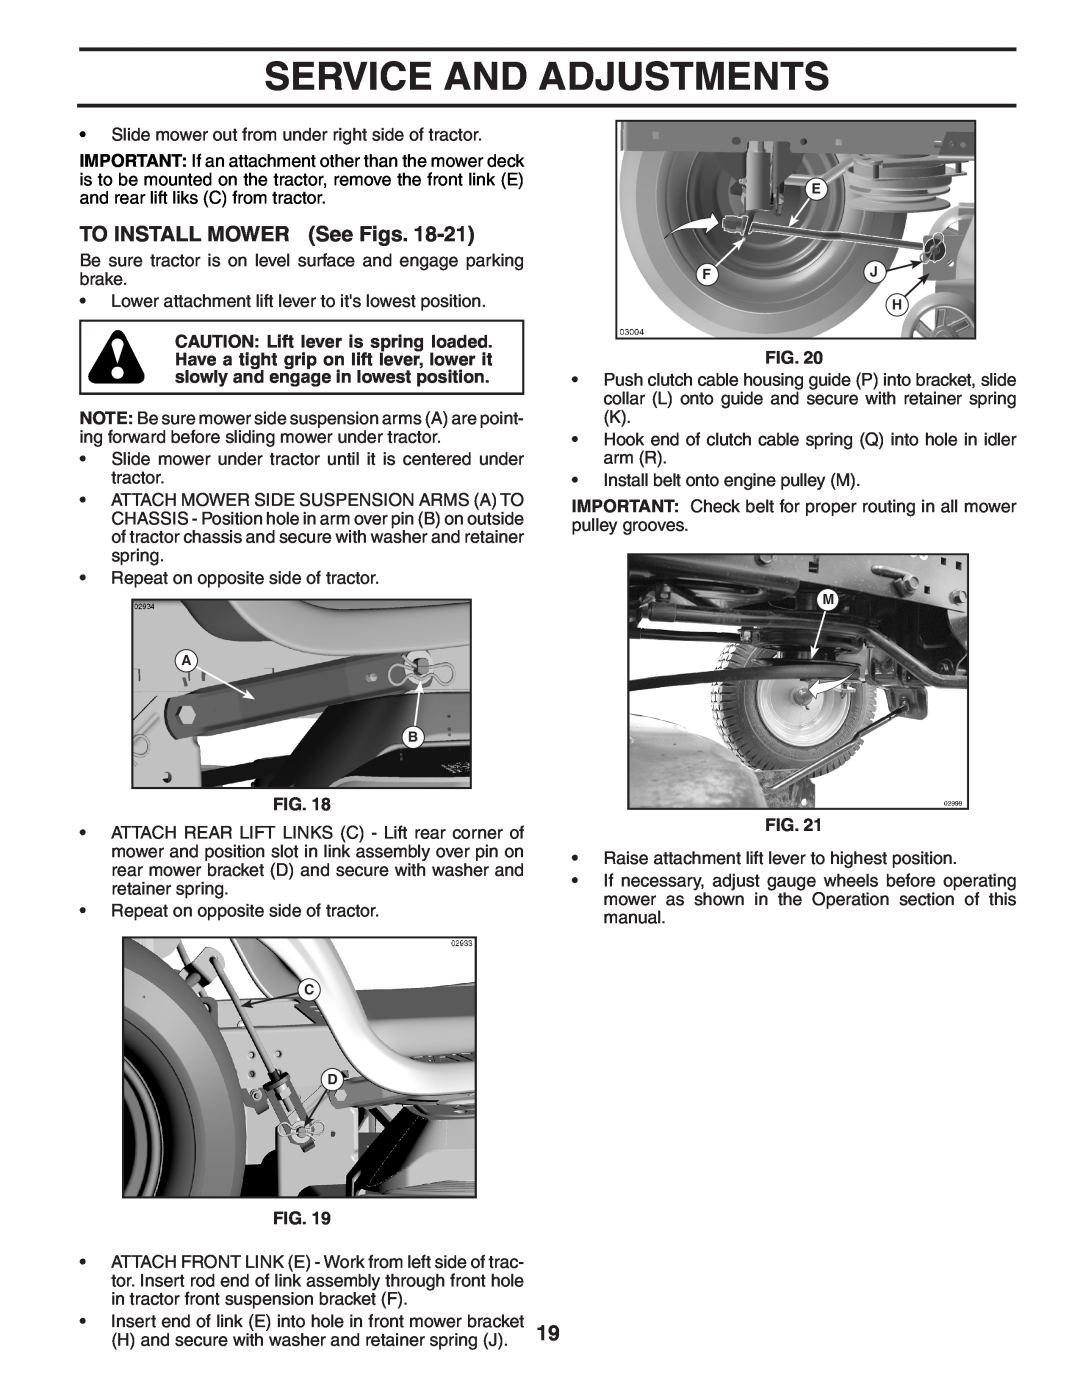 Poulan 96042002700, 404164 manual TO INSTALL MOWER See Figs, Service And Adjustments, E Fj H 